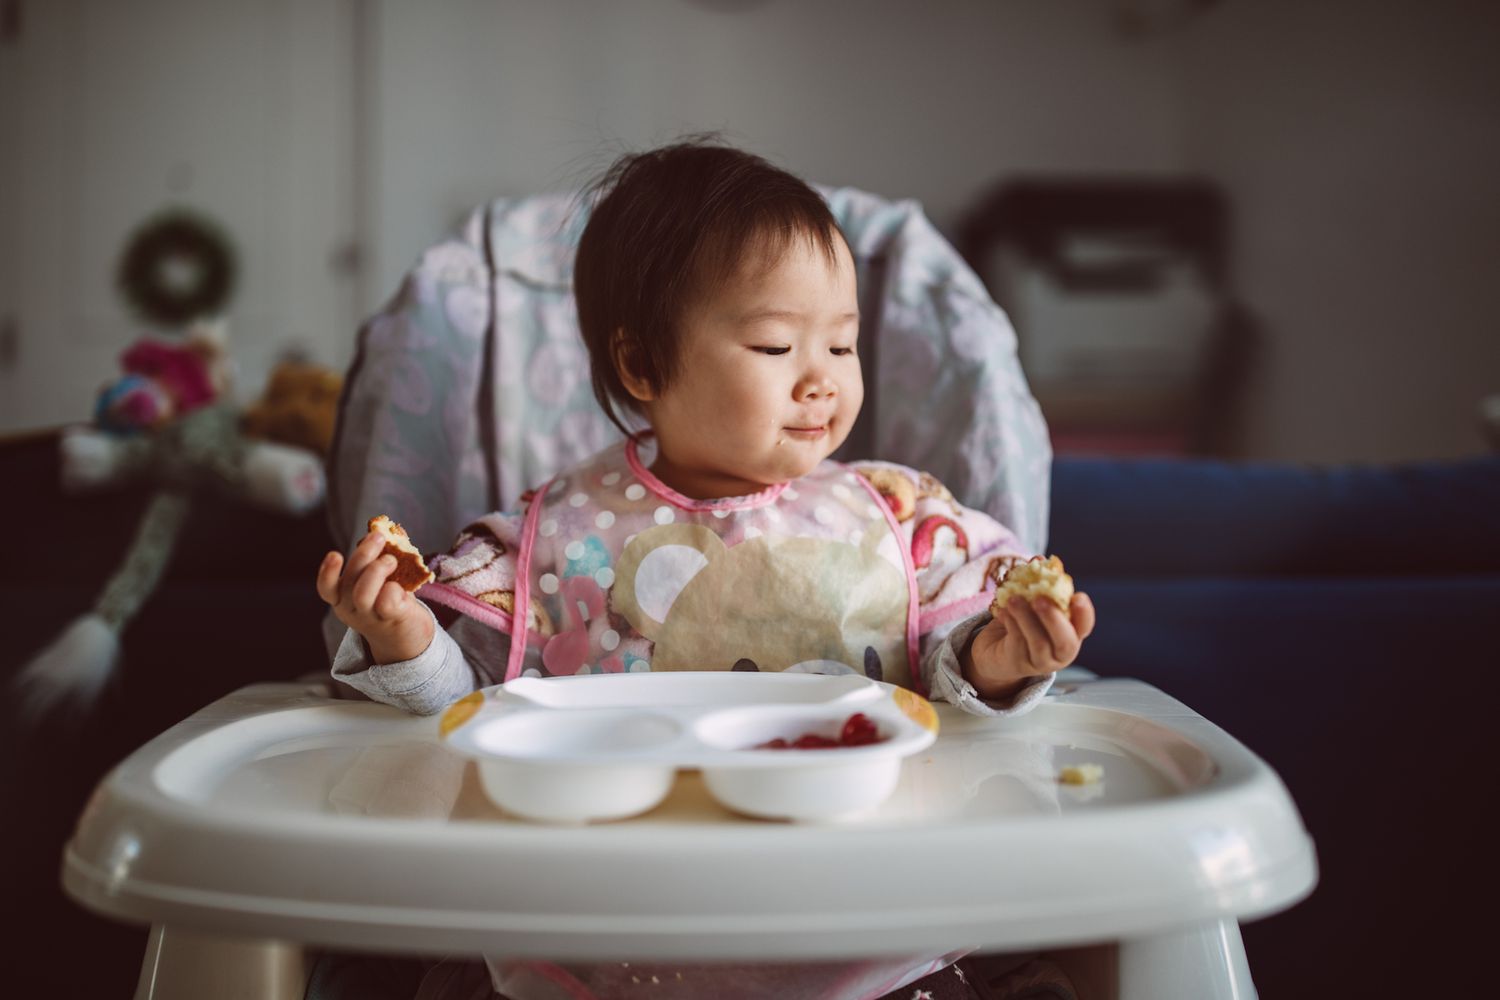 When Do You Switch From High Chair To Booster Seat?